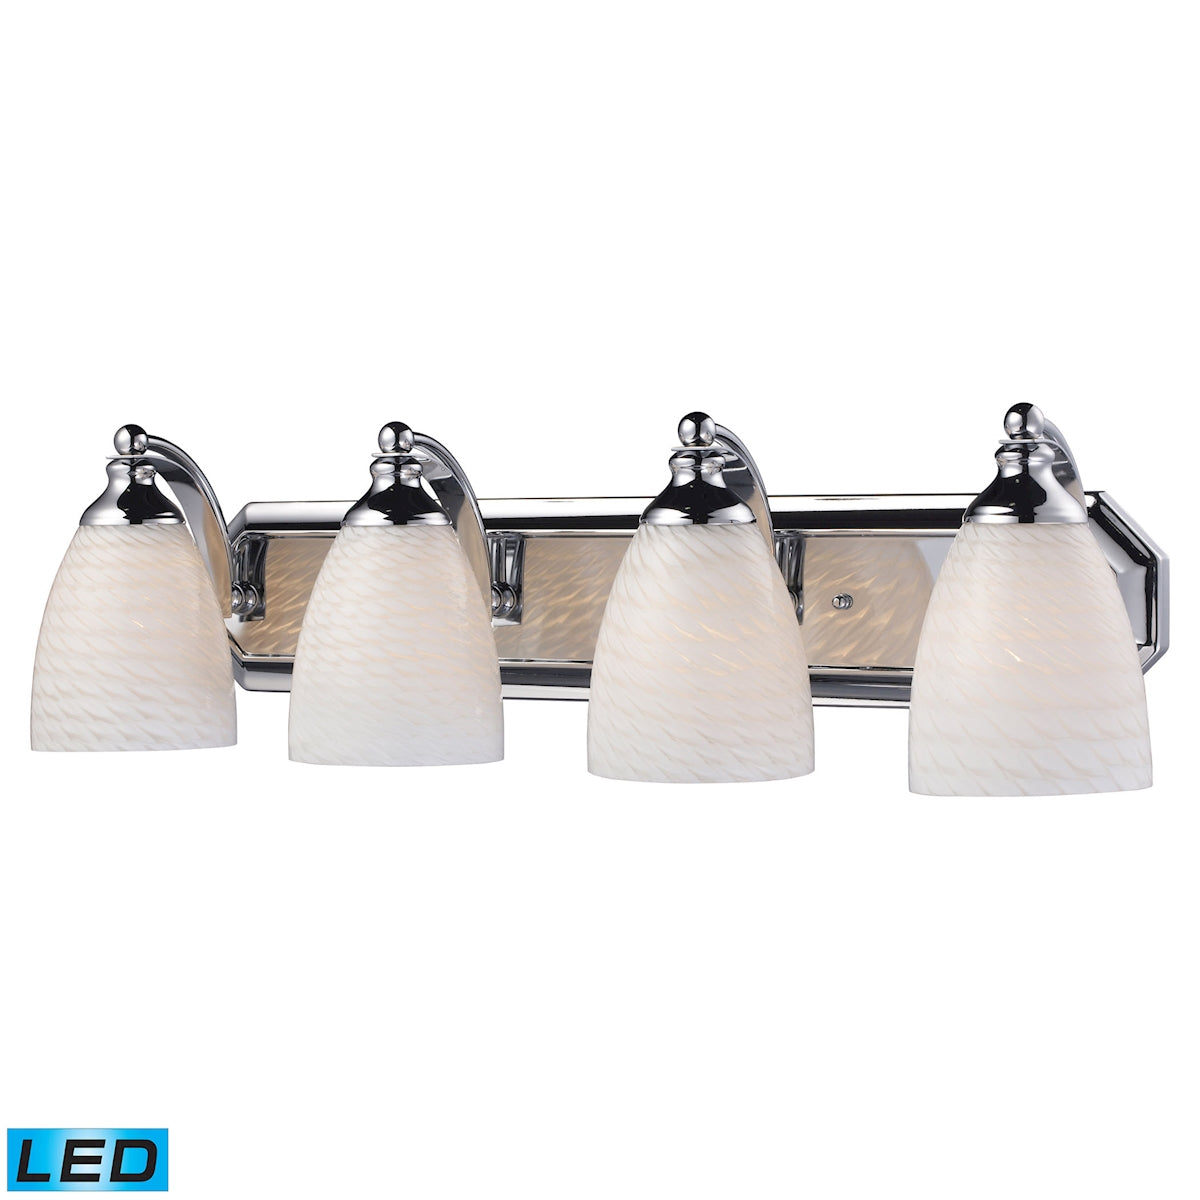 ELK Lighting 570-4C-WS-LED Mix and Match Vanity 4-Light Wall Lamp in Chrome with White Swirl Glass - Includes LED Bulbs